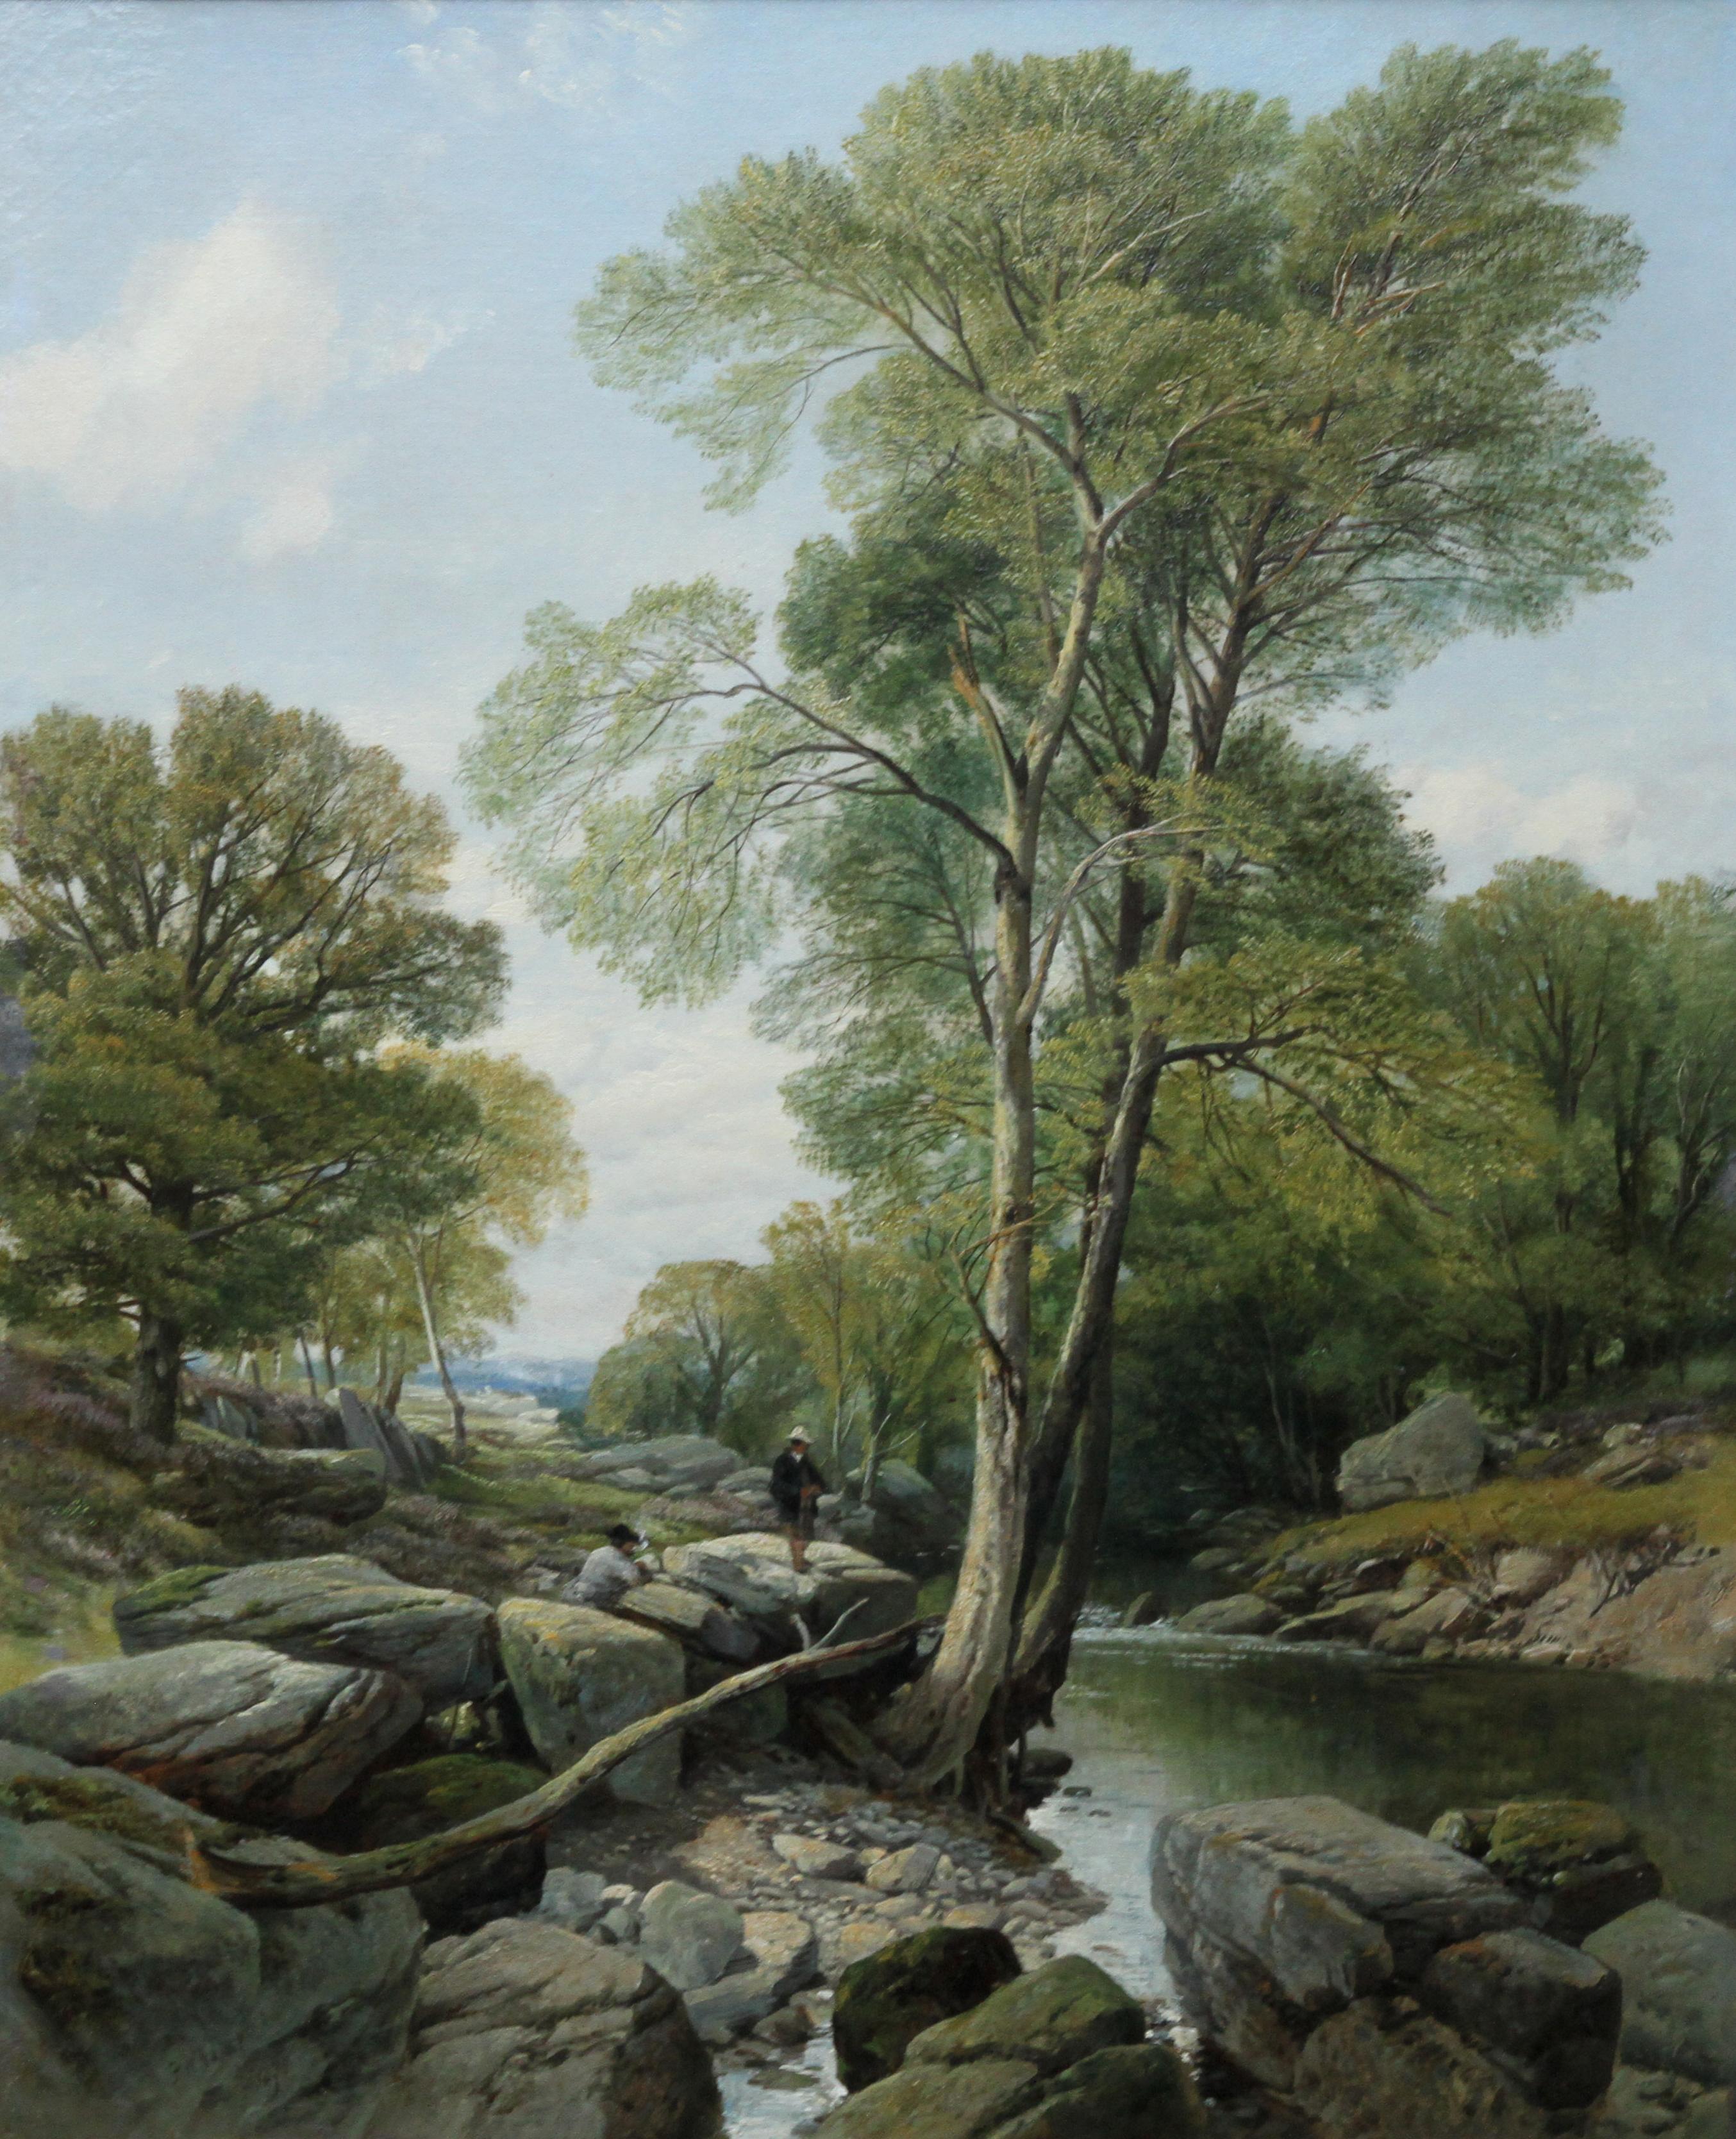 Fishermen in a Rocky River Landscape - British Victorian art oil painting - Painting by Frederick William Hulme